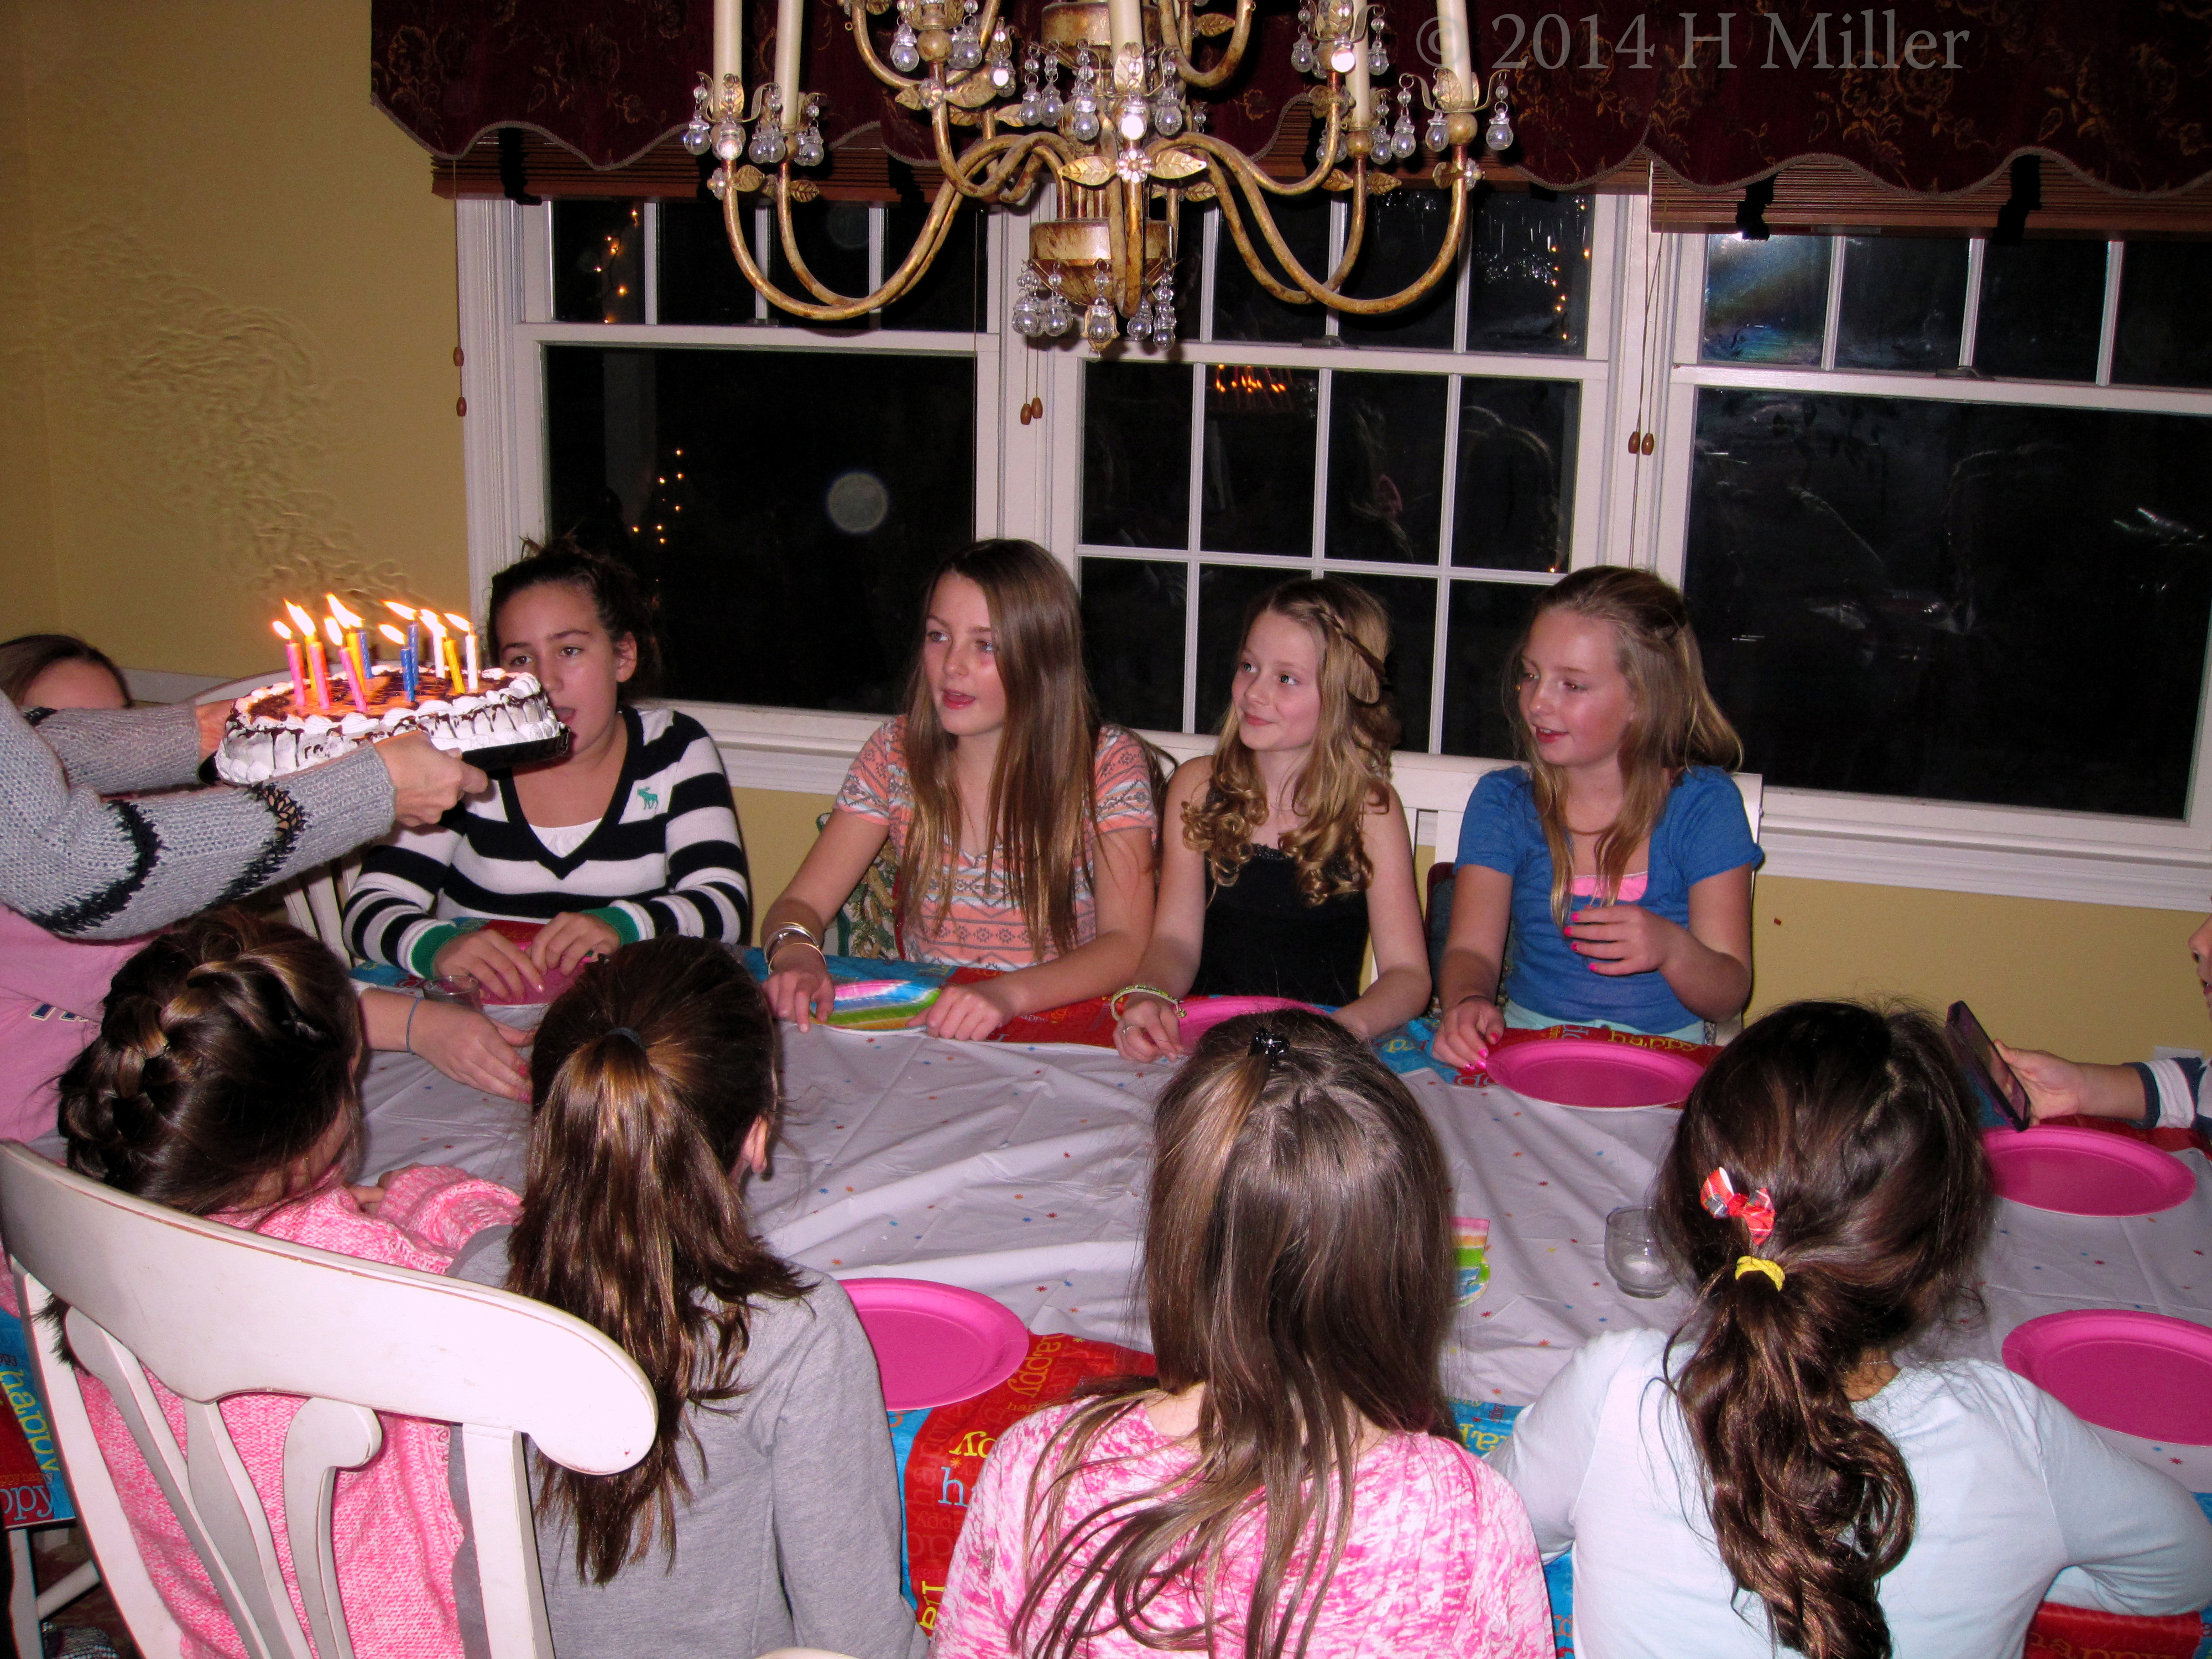 Mara's Mom Brings Out The Cake With Candles!! 